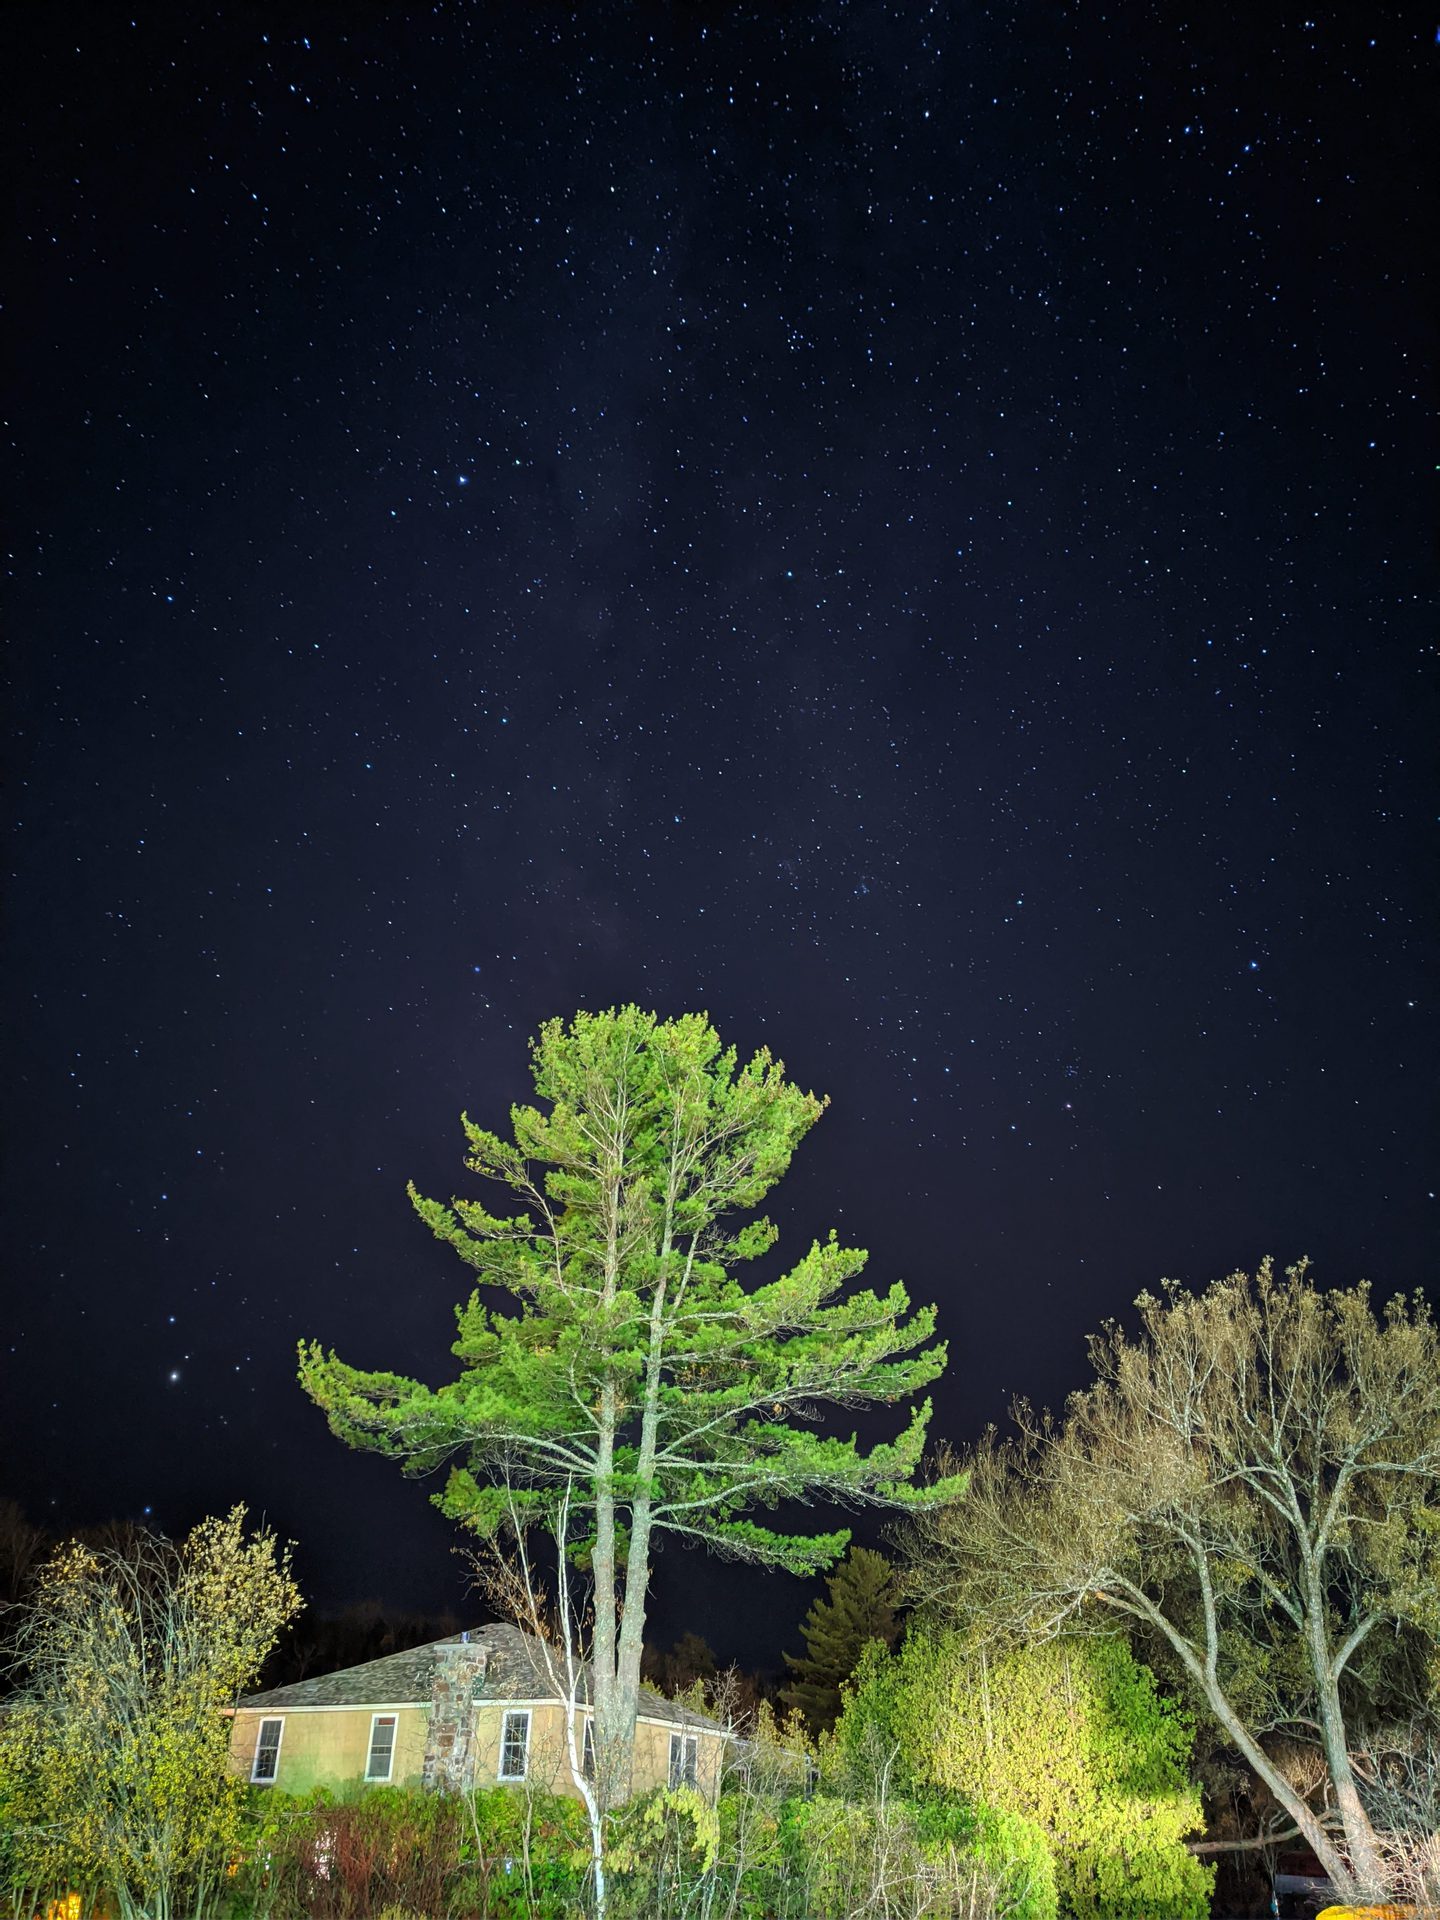 Google Pixel 4 astro mode house tree and sky